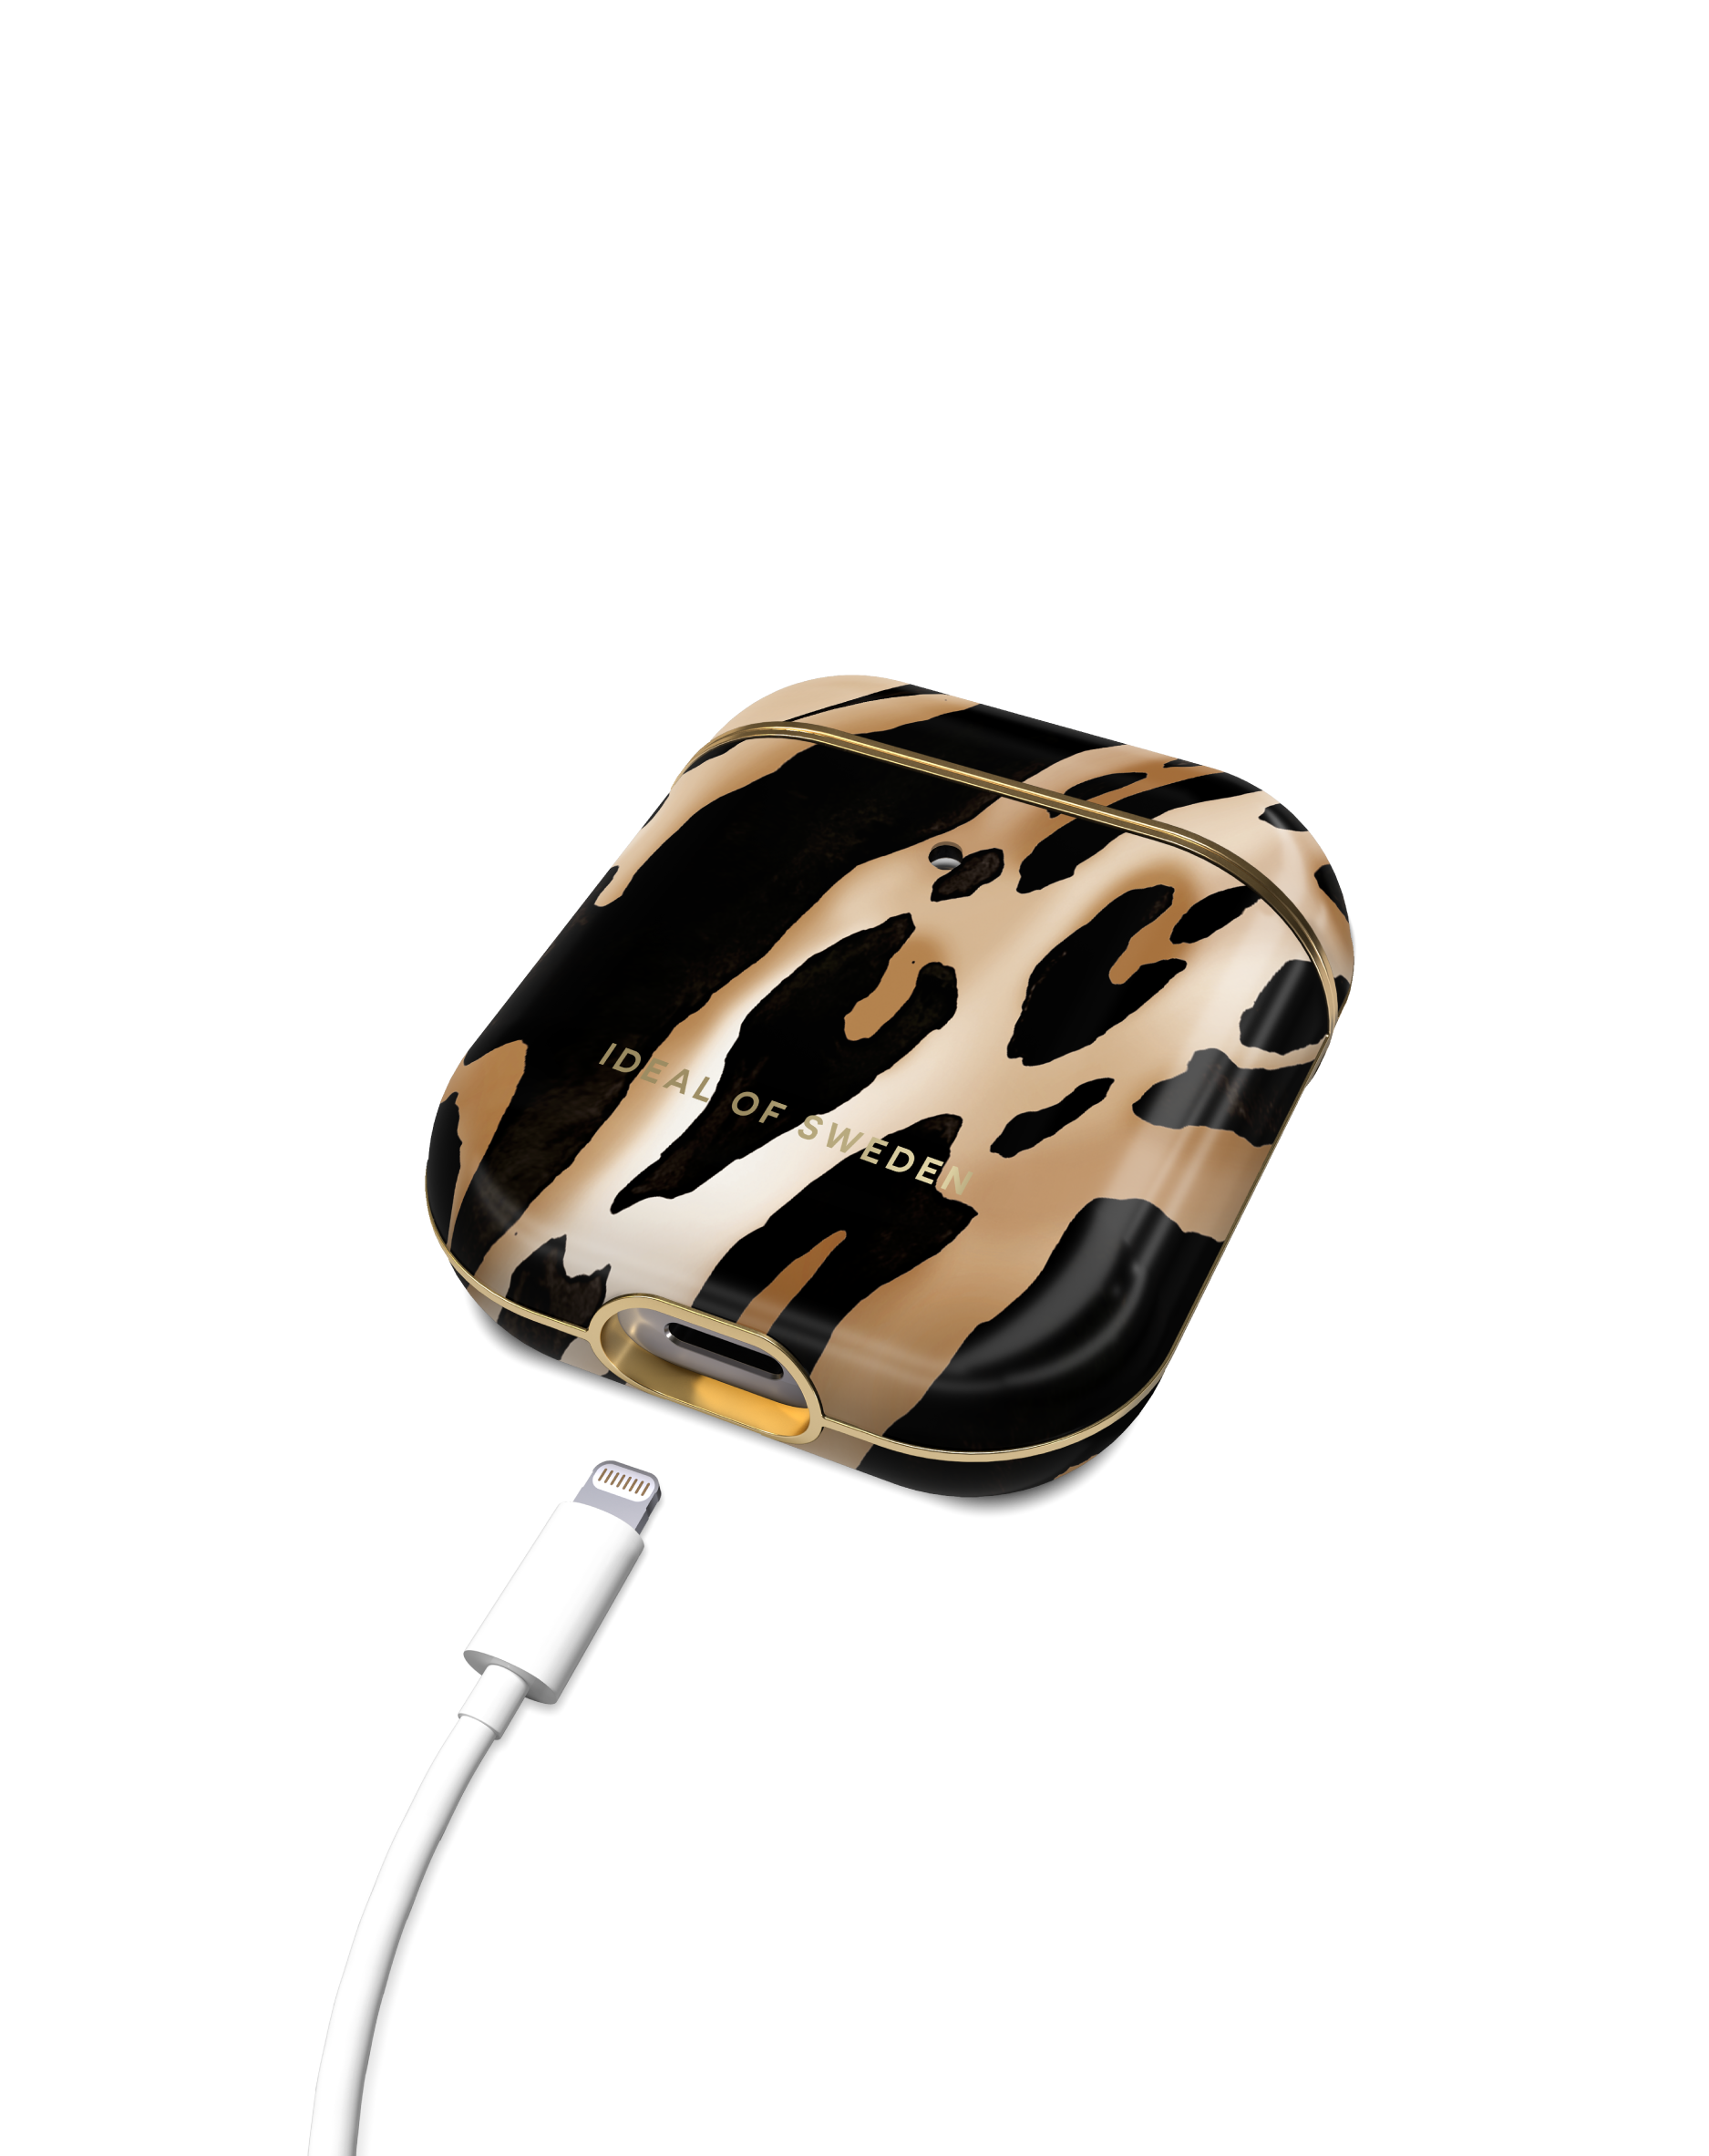 OF IDEAL IDFAPCAW21-356 AirPod Cover Leopard Iconic Apple Case für: Full passend SWEDEN